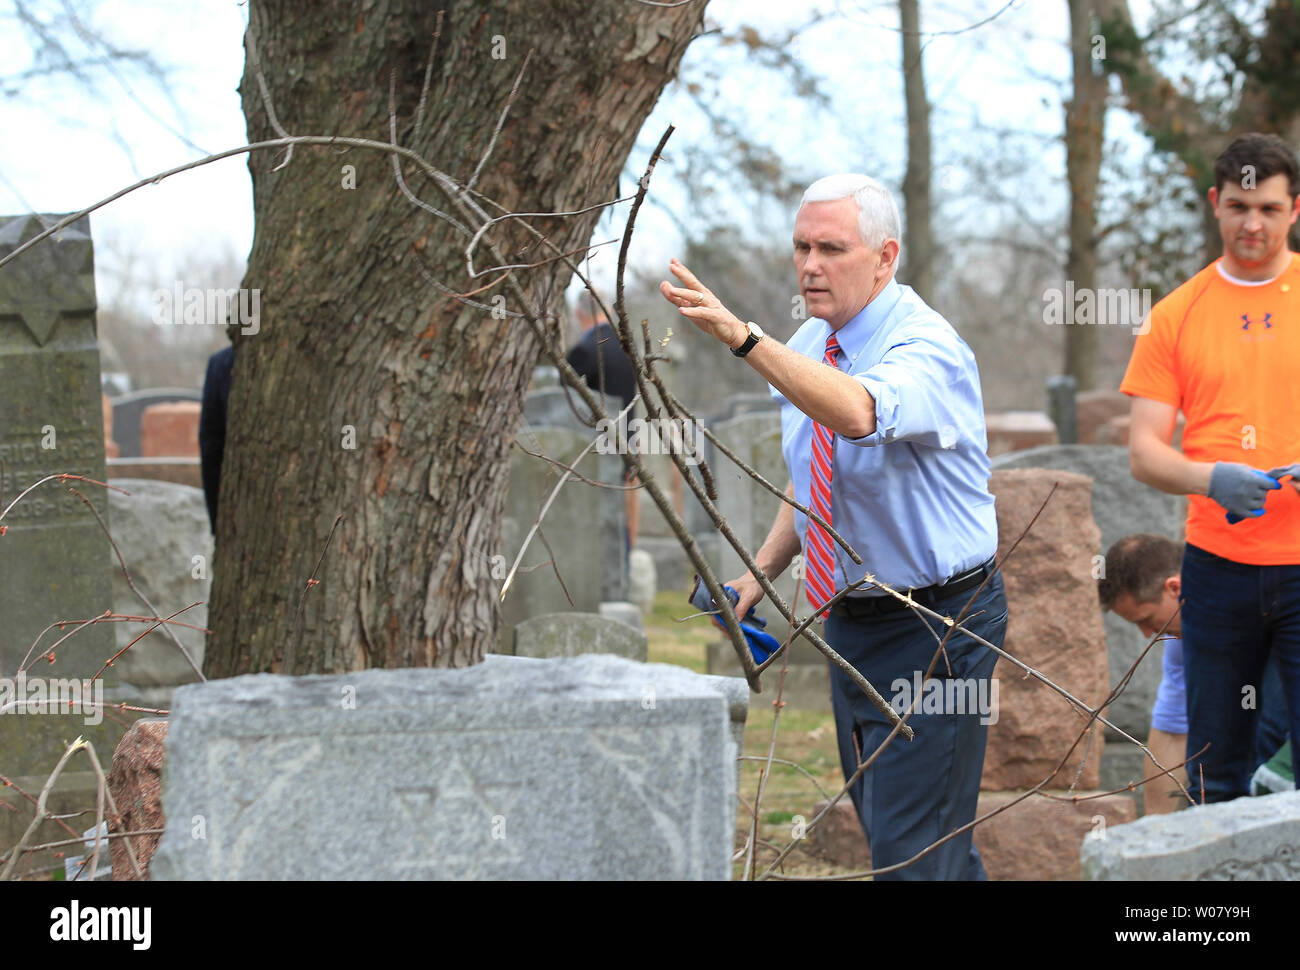 Vice President Mike Pence throws branches into a pile as he participates in a cleanup at Chesed Shel Emeth Cemetery in University City on February 22, 2017. Vandals toppled nearly 200 headstones on February 20, 2017 in the Jewish cemetery. Pence who was in town for another event had asked to go to the cemetery for the large community cleanup that attracted over four thousand people.  Photo by Bill Greenblatt/UPI Stock Photo